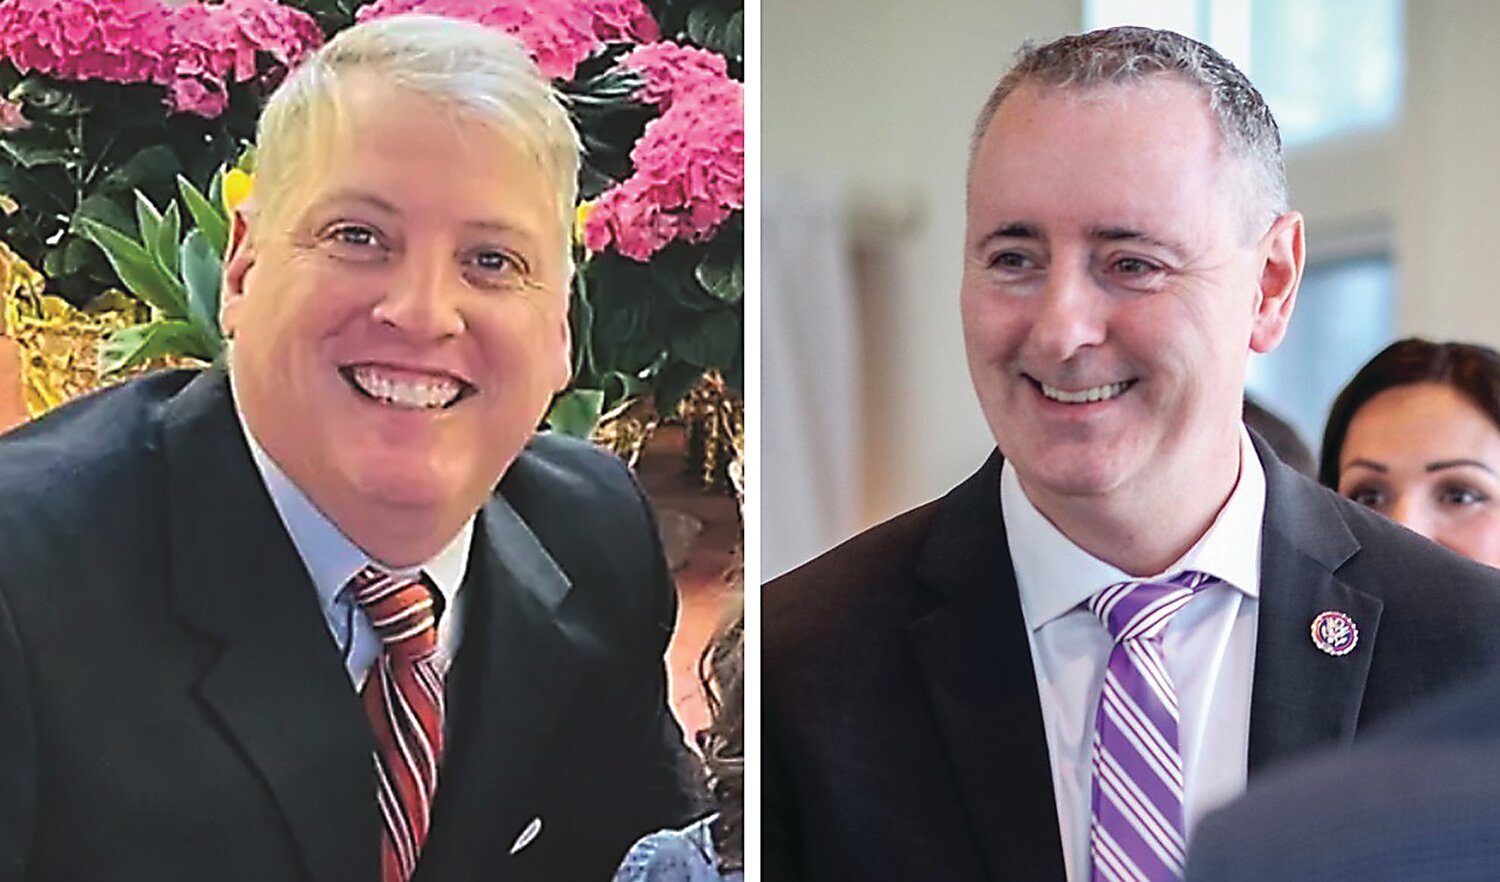 (Left) Mark Houck, of Haycock, is challenging U.S. Rep. Brian Fitzpatrick’s re-election bid in the 2024 Republican Primary for the 1st Congressional District.